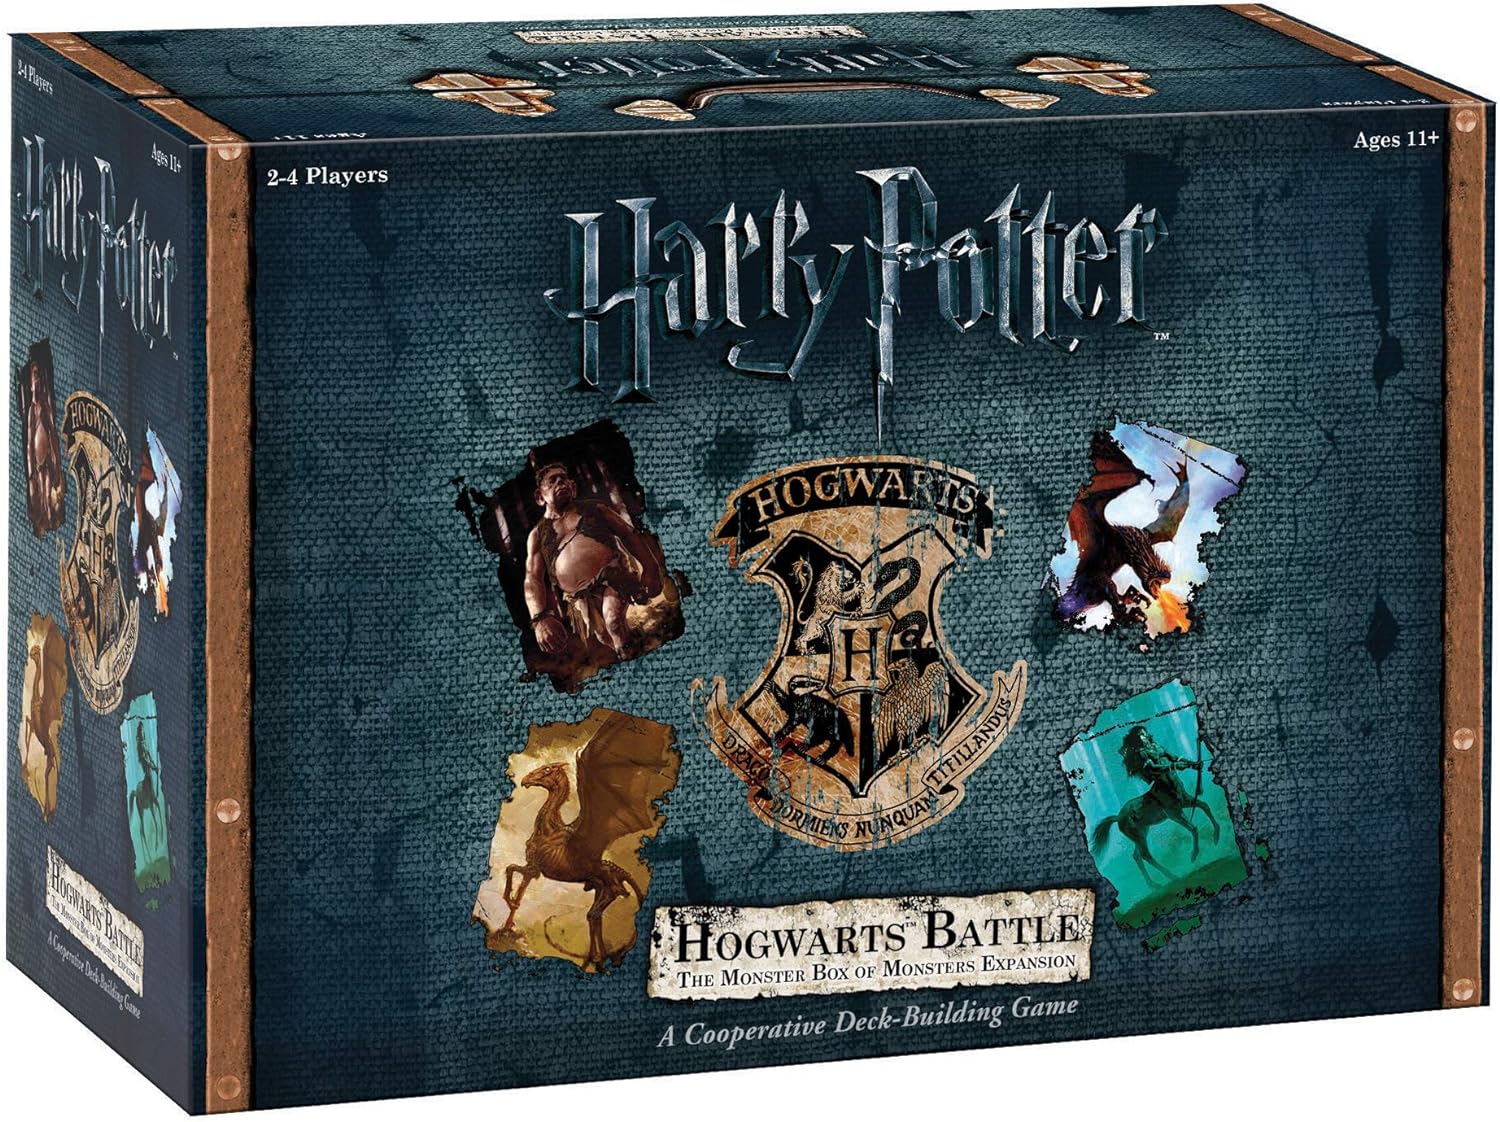 Harry Potter Hogwarts Battle: The Monster Box of Monsters Expansion Card Game $24.91 + Free Shipping w/ Prime or on $35+